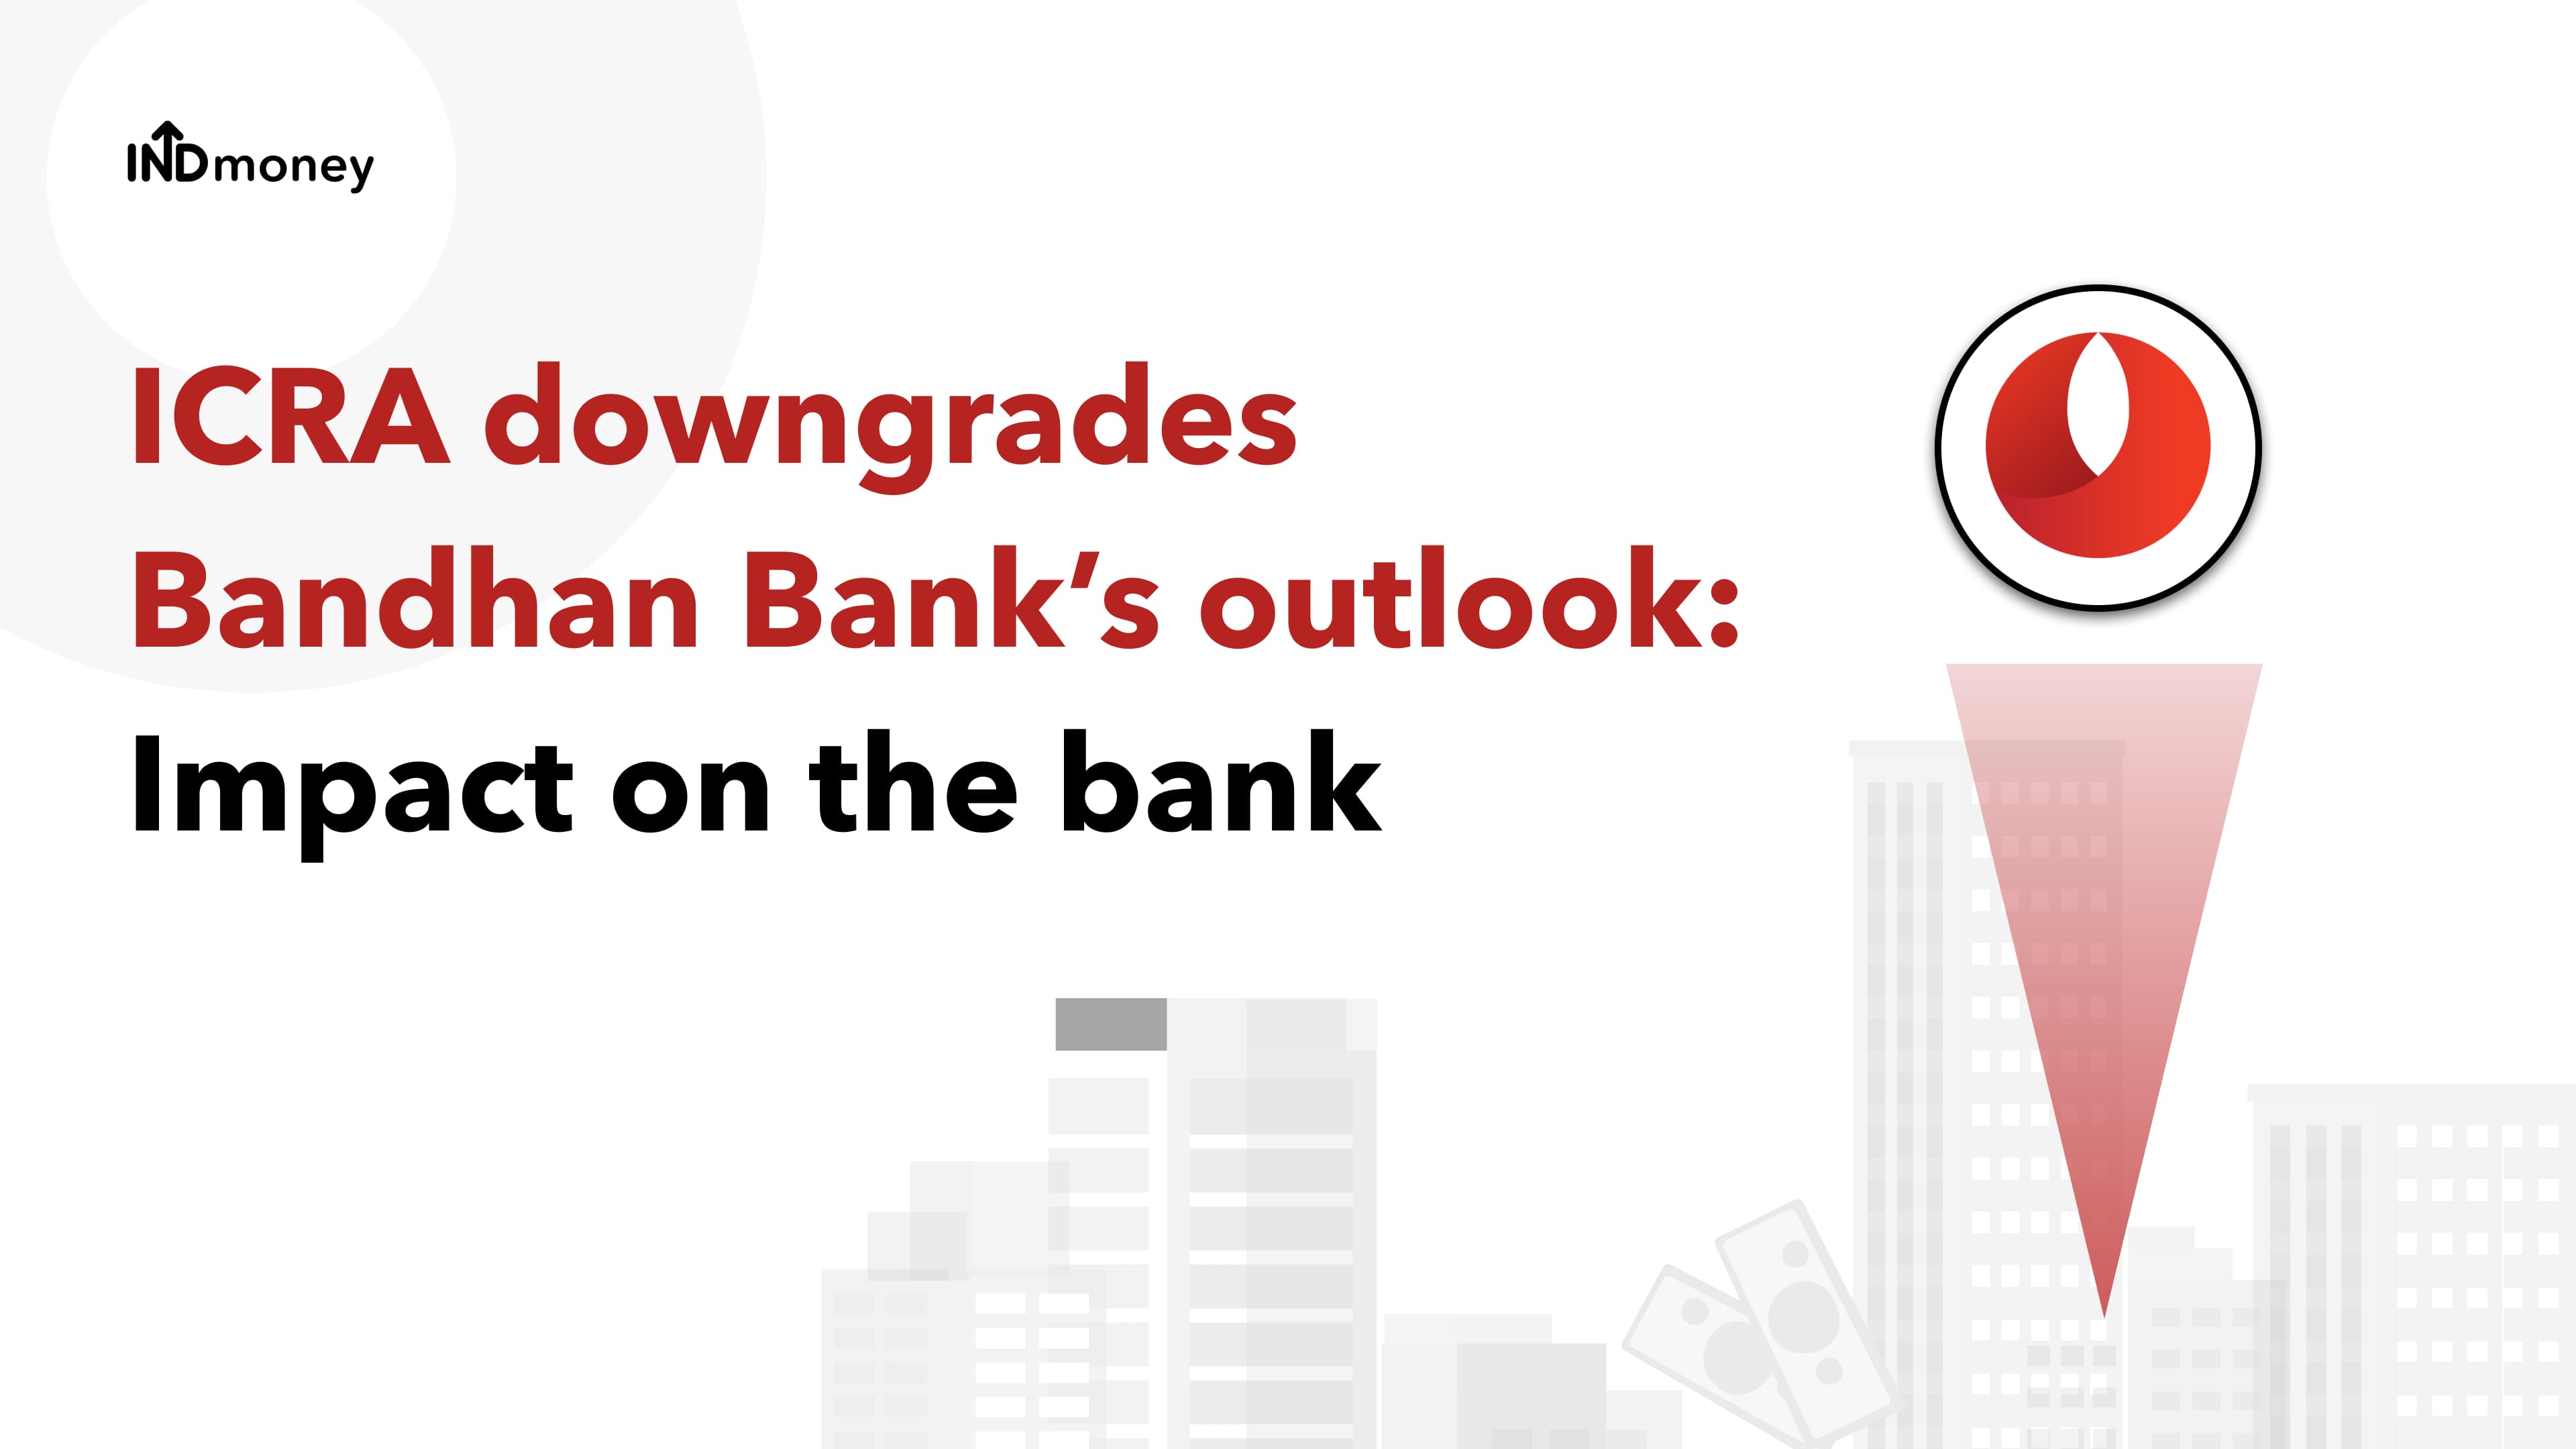 ICRA downgrades Bandhan Bank’s outlook: Impact on the bank